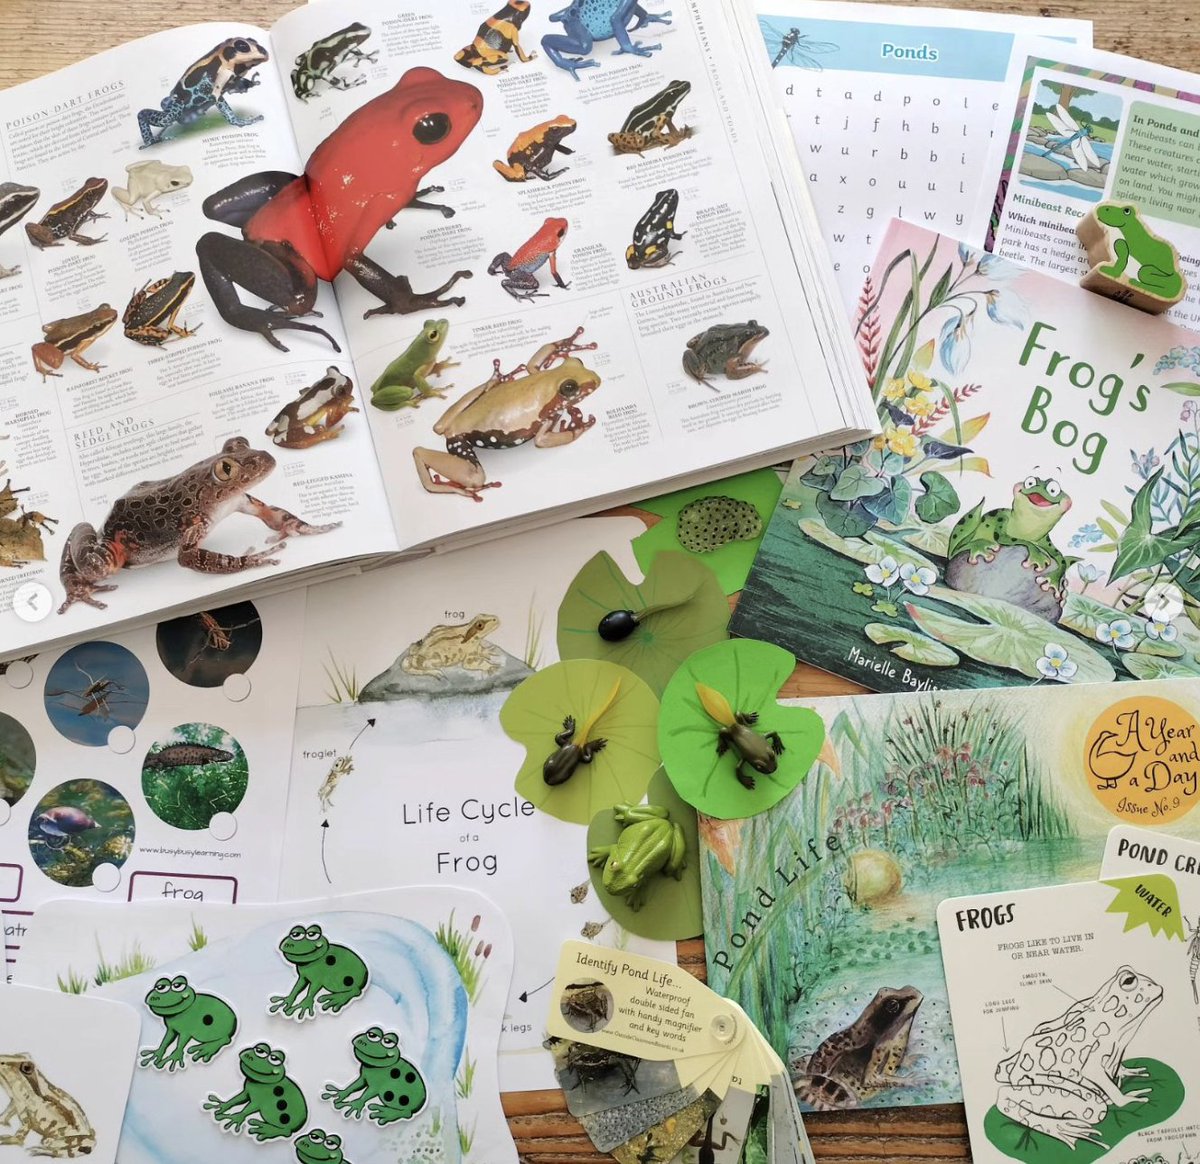 Thank you Busy Busy Learning for including Frog's Bog in your amphibianTASTIC collection of frog books 🐸 #frogsbog #frogs #kidlit #AuthorsOfTwitter #graffeg